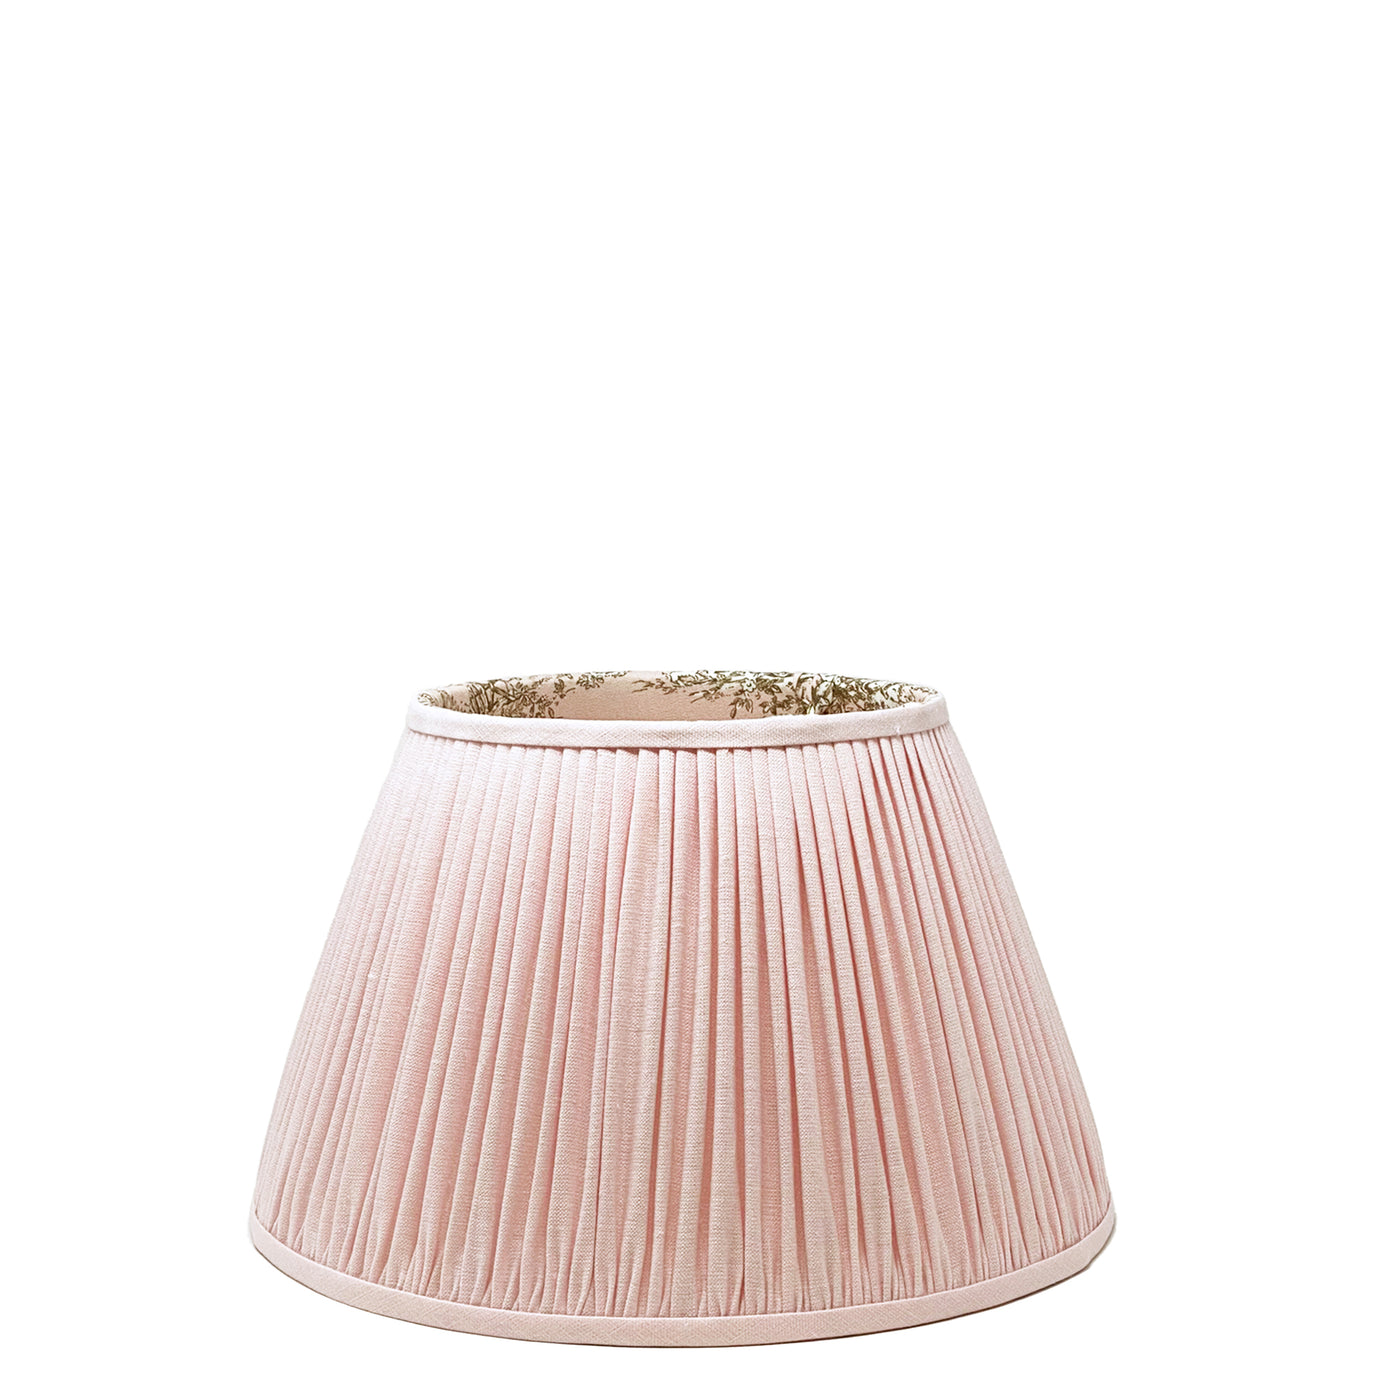 Pink lampshade with toile interior